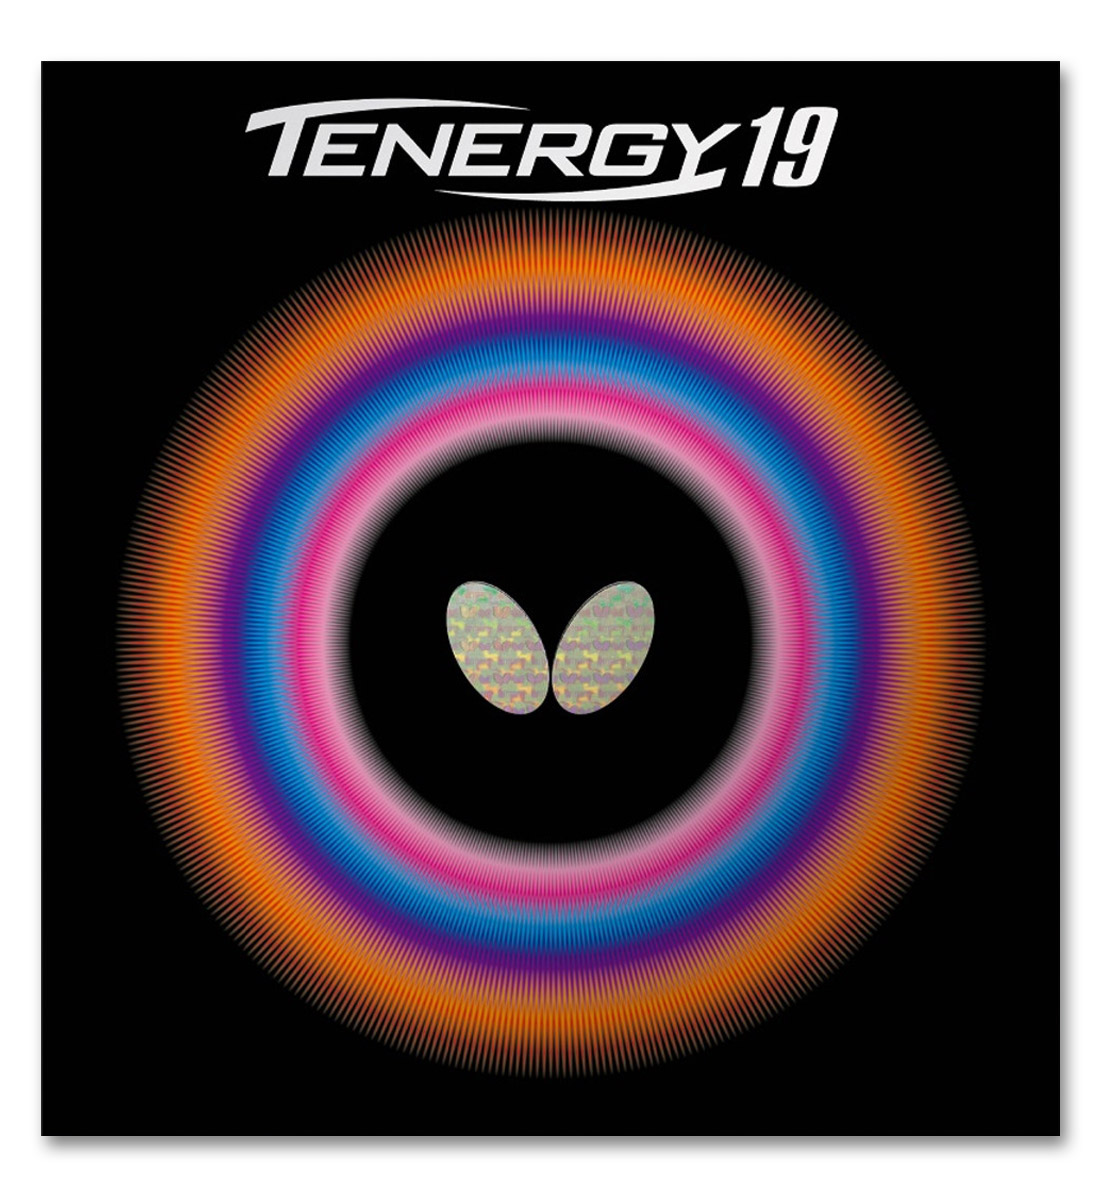 Butterfly Tenergy 19 Questions & Answers